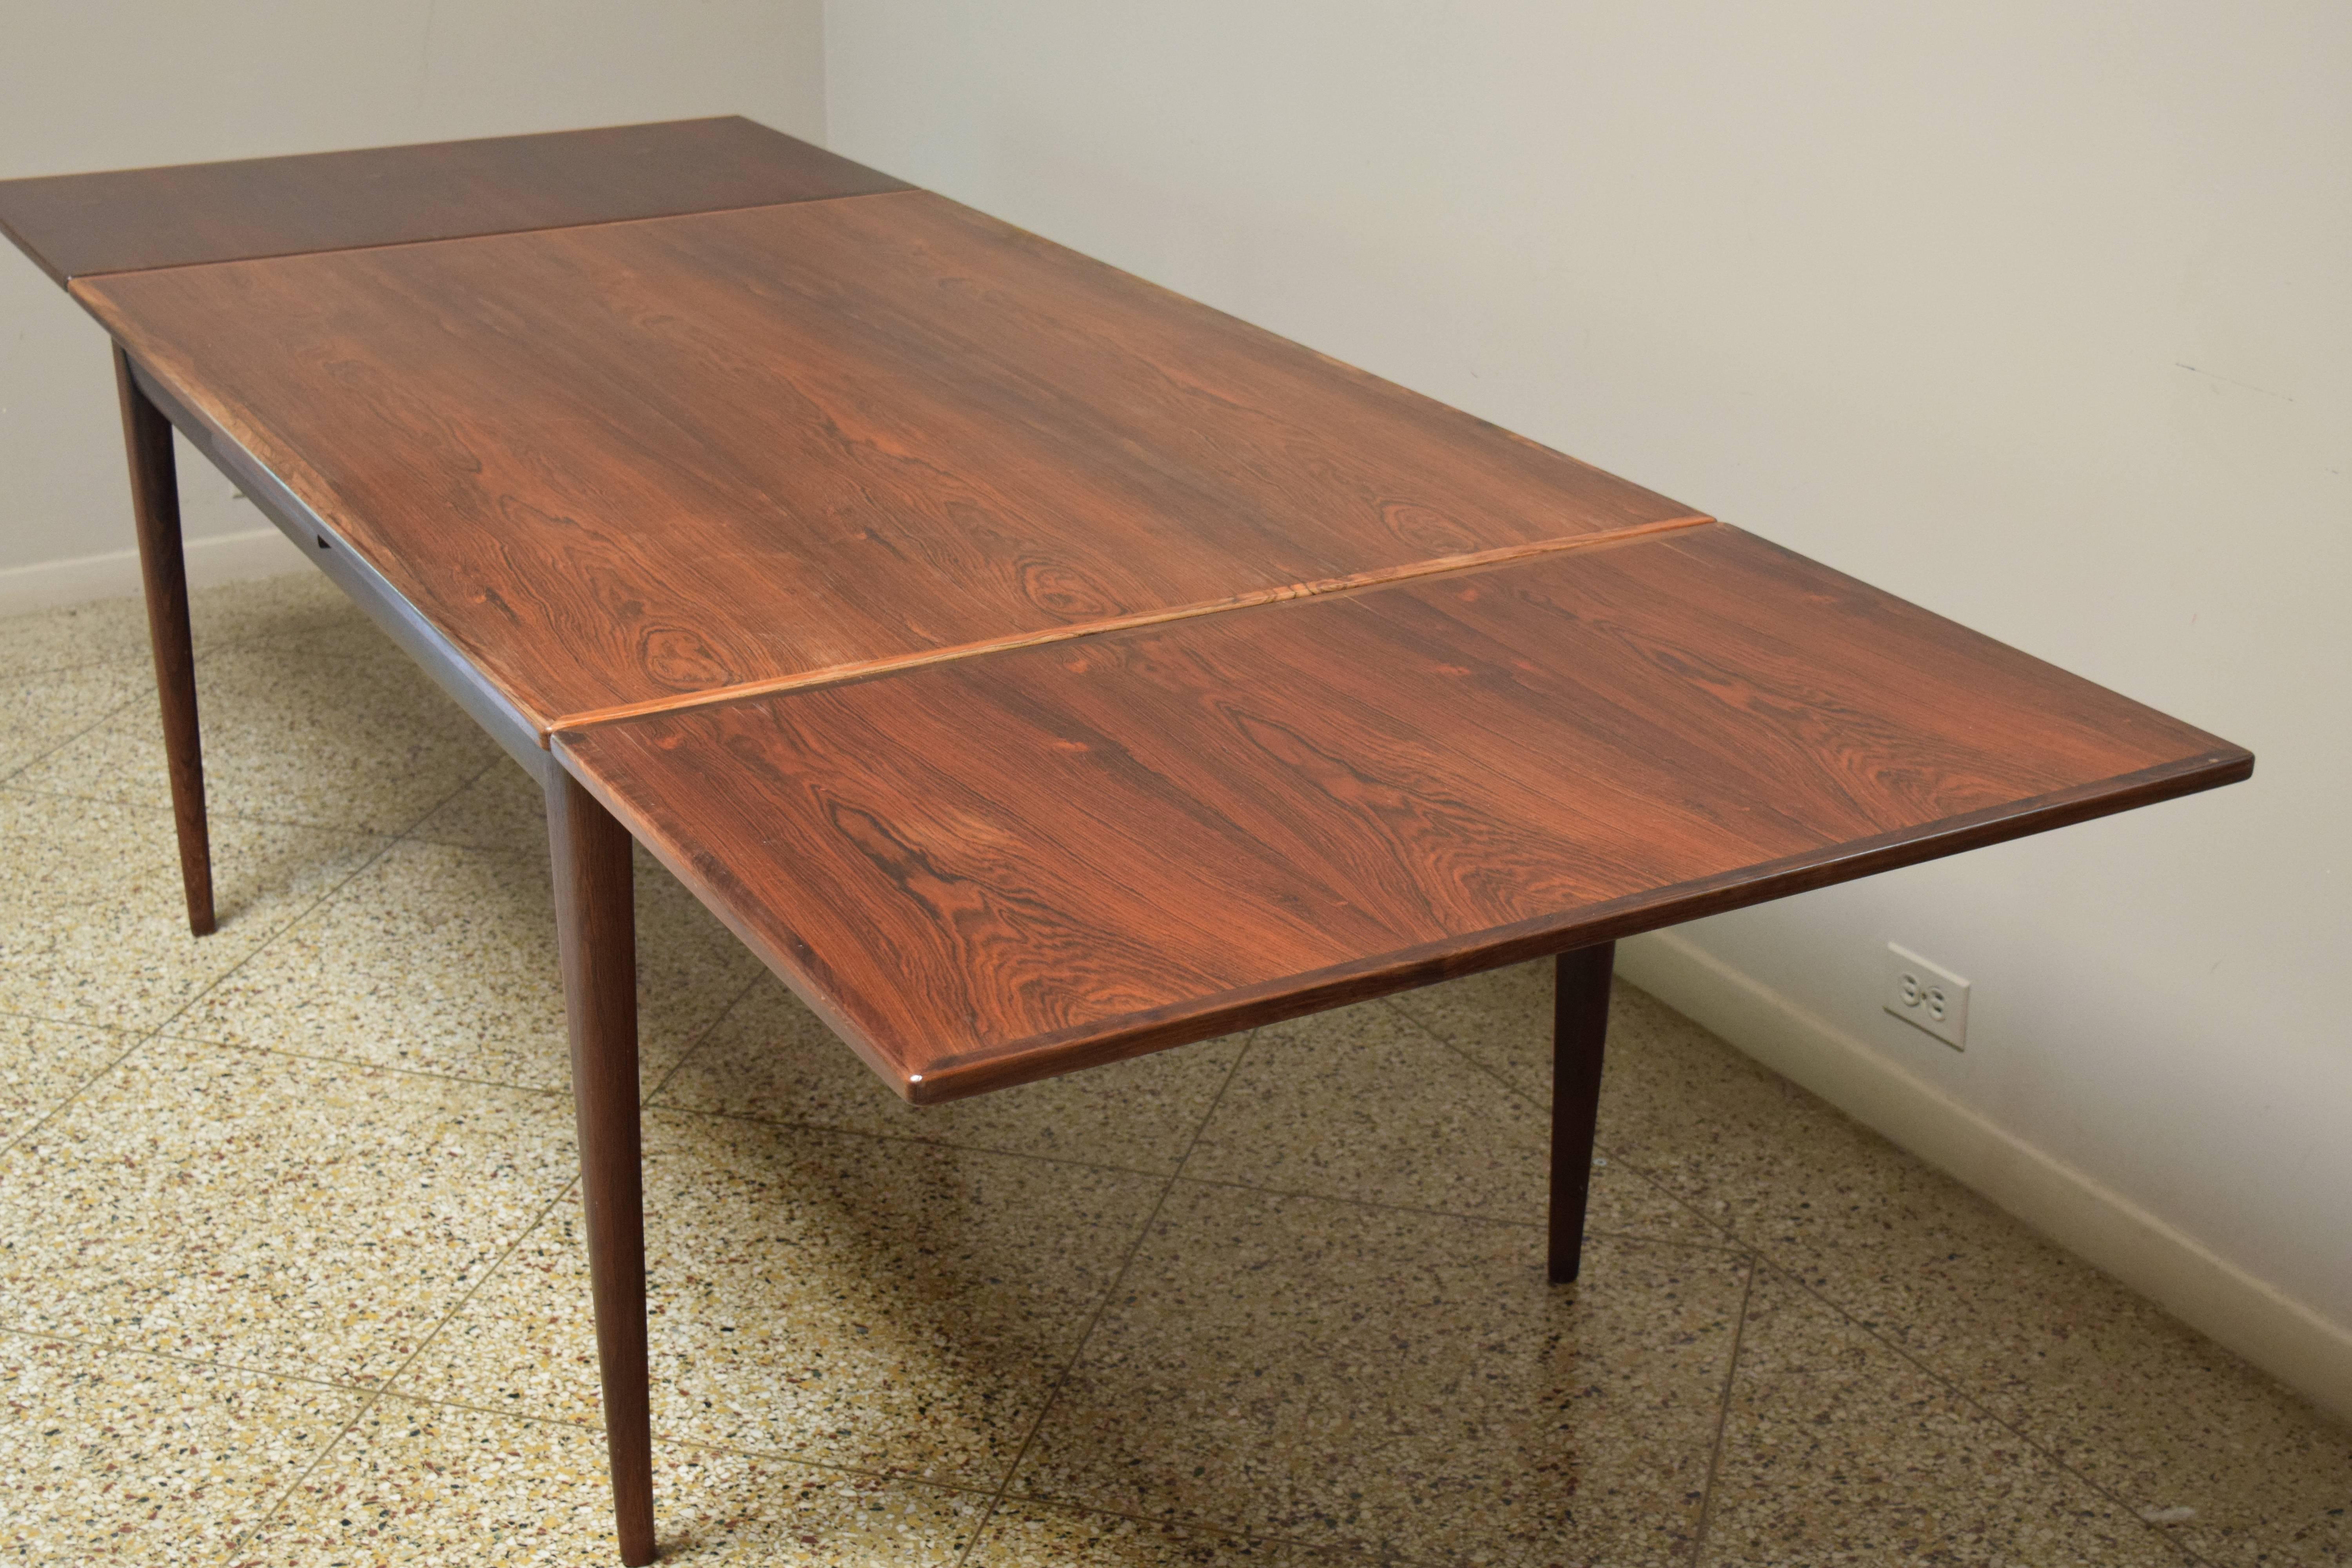 Beautiful model #12 dining table with tapered legs and self-storing leaves by Niels Otto Møller for J.L. Møller. Signed with manufacturer's sticker and Danish control sticker. Table measures 59" L closed; 104" L fully extended. Set of